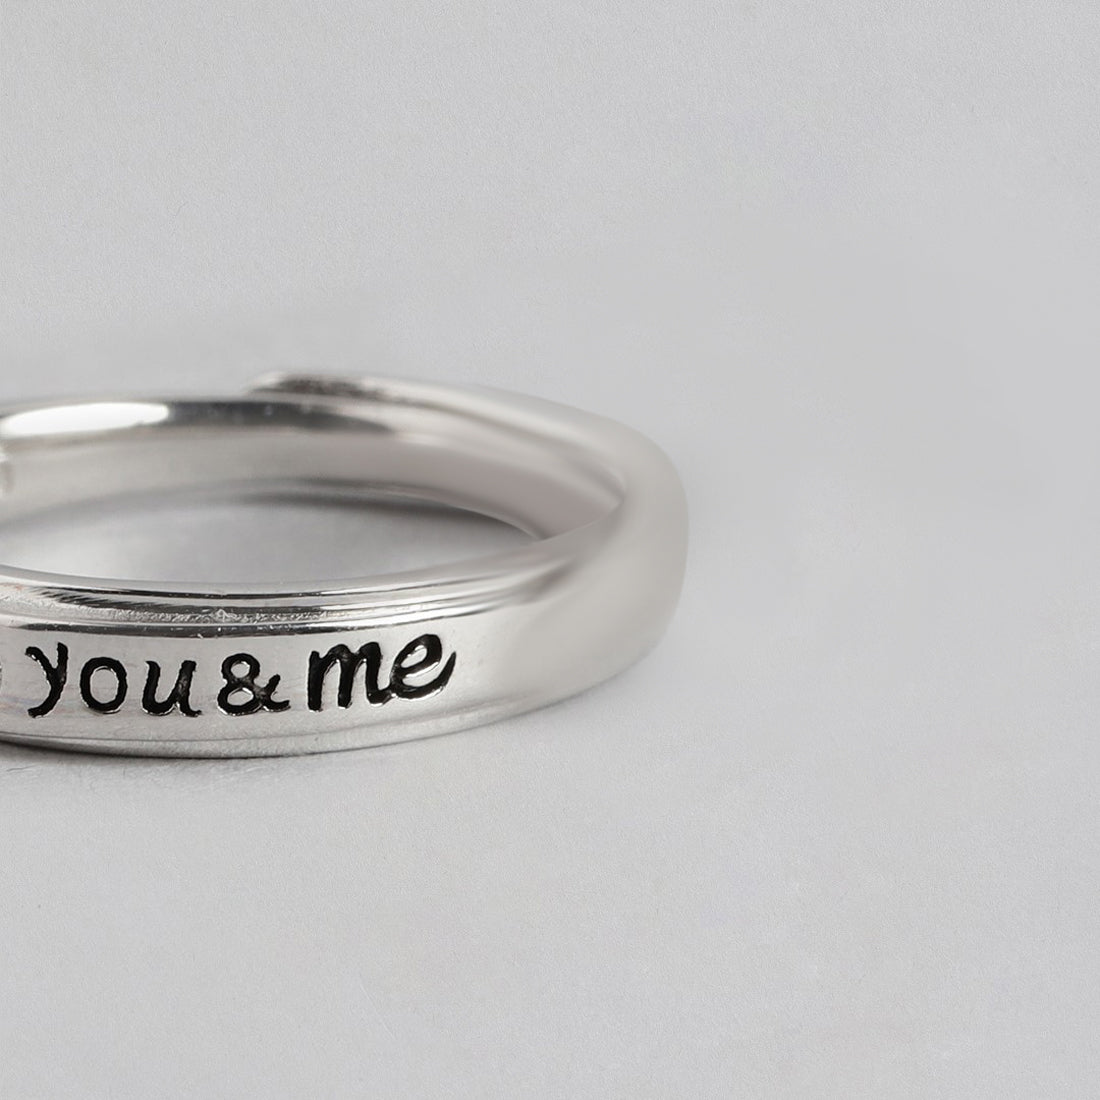 You & Me 925 Sterling Silver Ring for Him